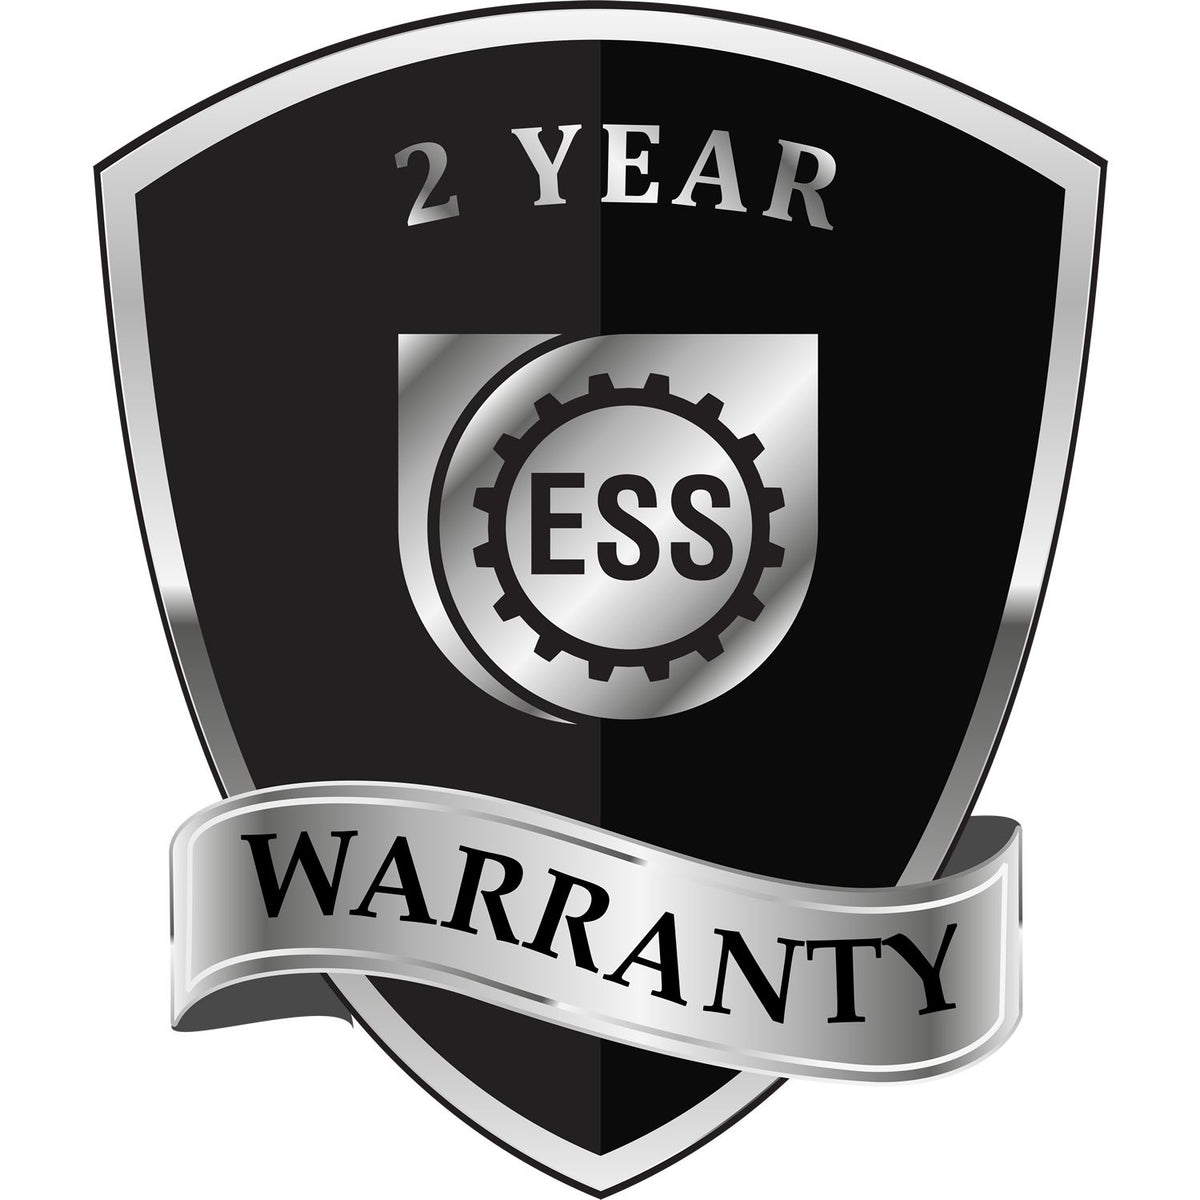 A black and silver badge or emblem showing warranty information for the Gift Delaware Geologist Seal